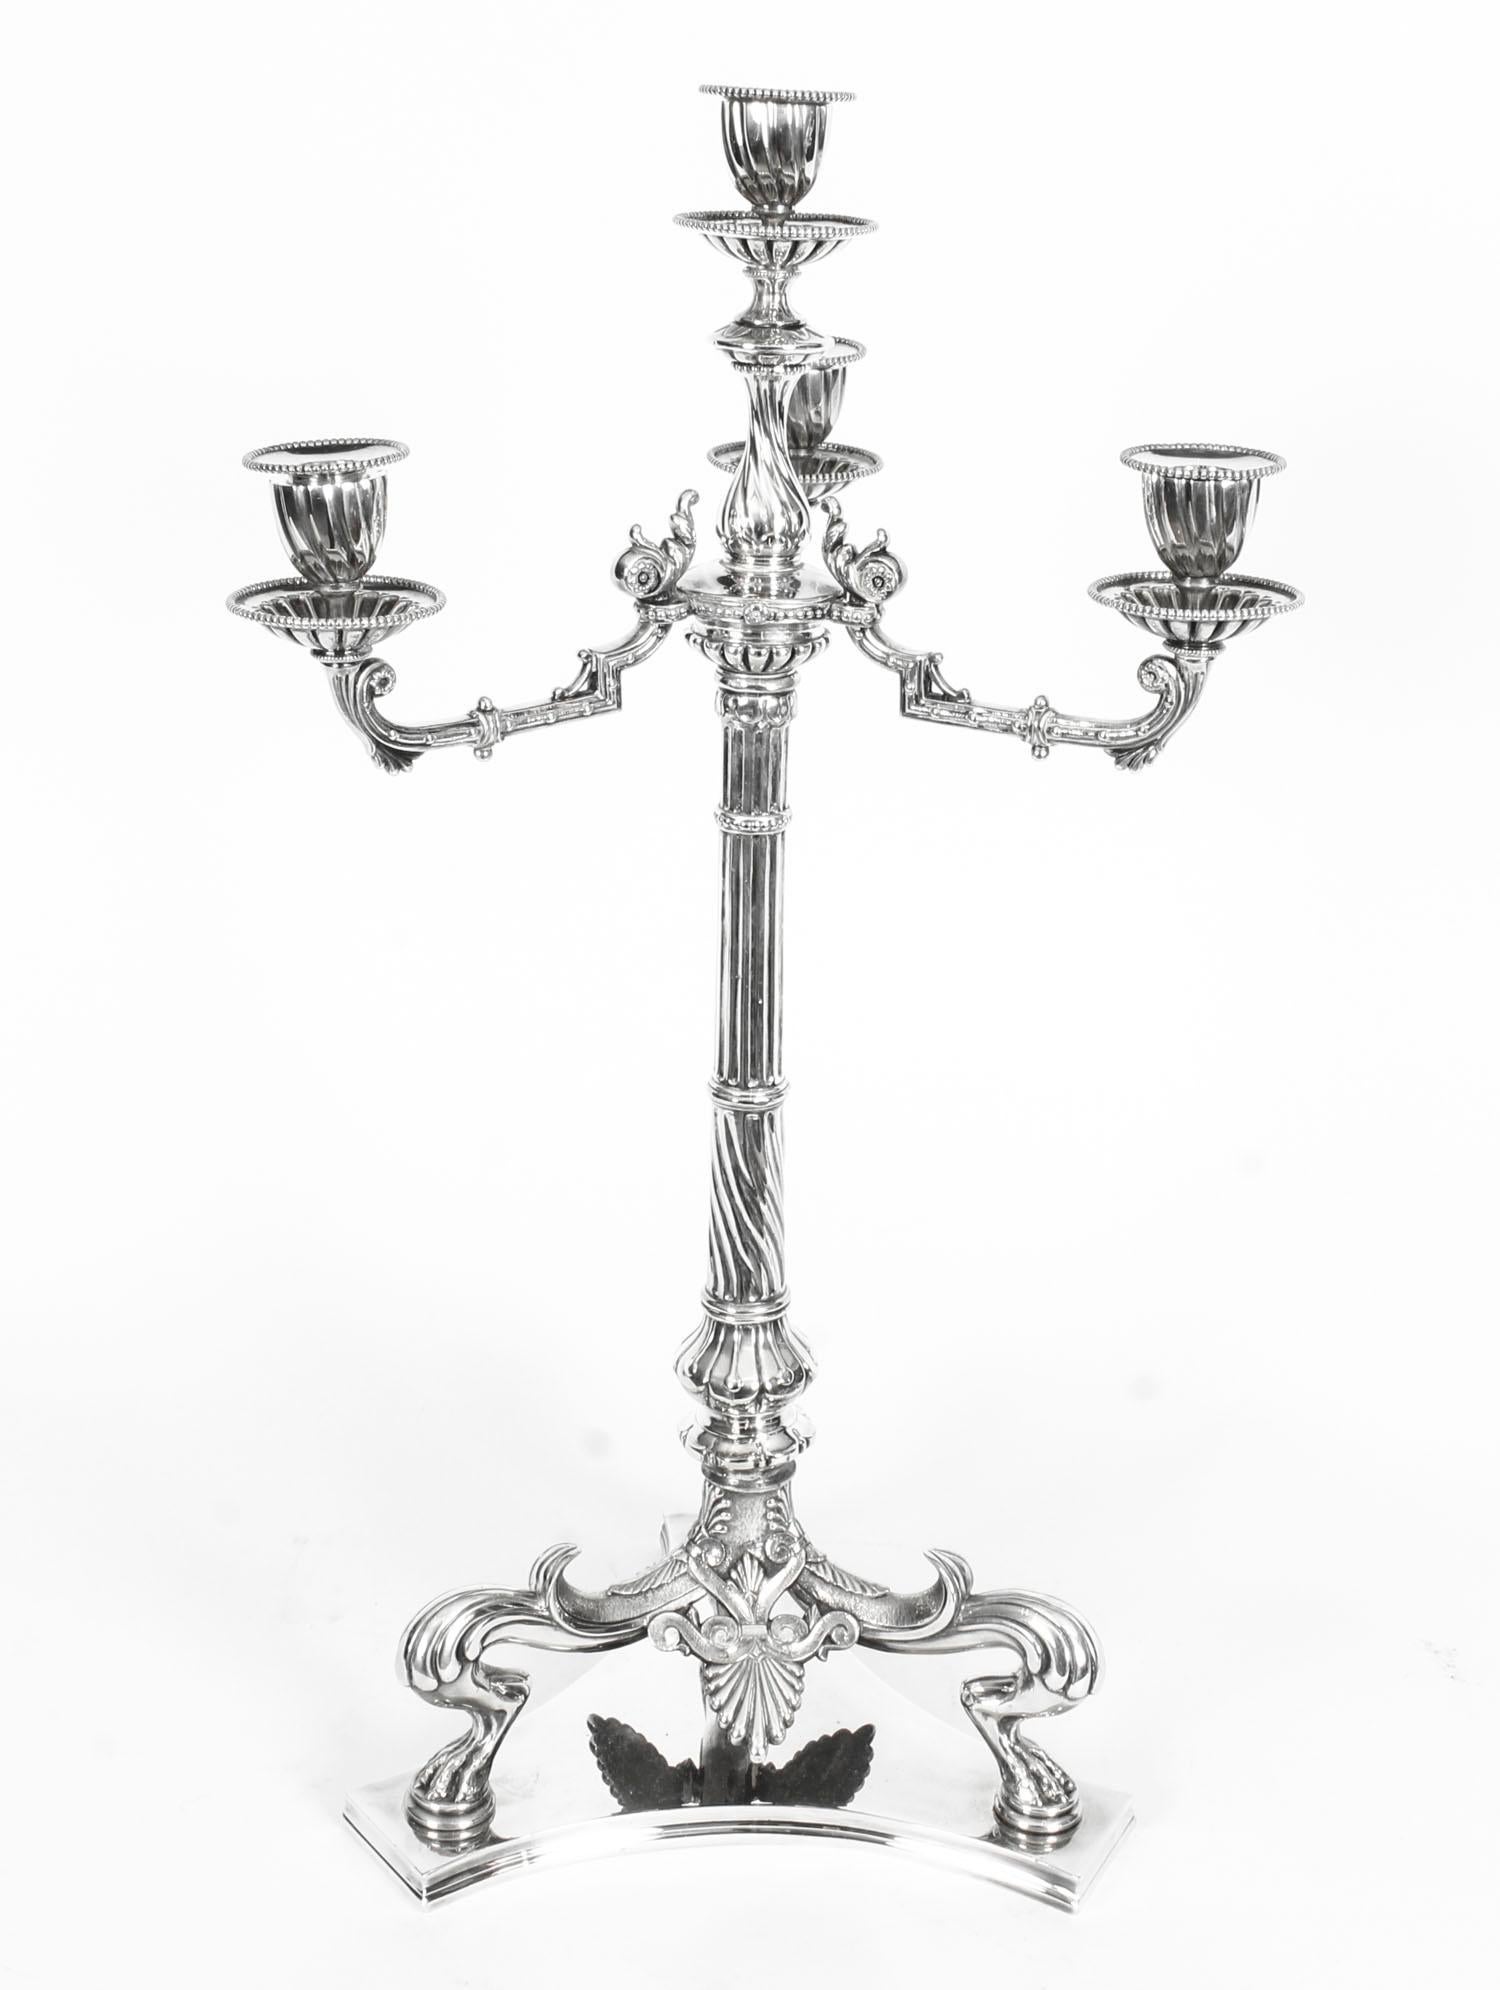 This is a truly magnificent and highly distinguished pair of antique Victorian silver plated four-light three-branch table candelabra by the renowned silversmiths Hodd & Linley, Hatton Gardens, London, circa 1870 in date.

Each of these splendid